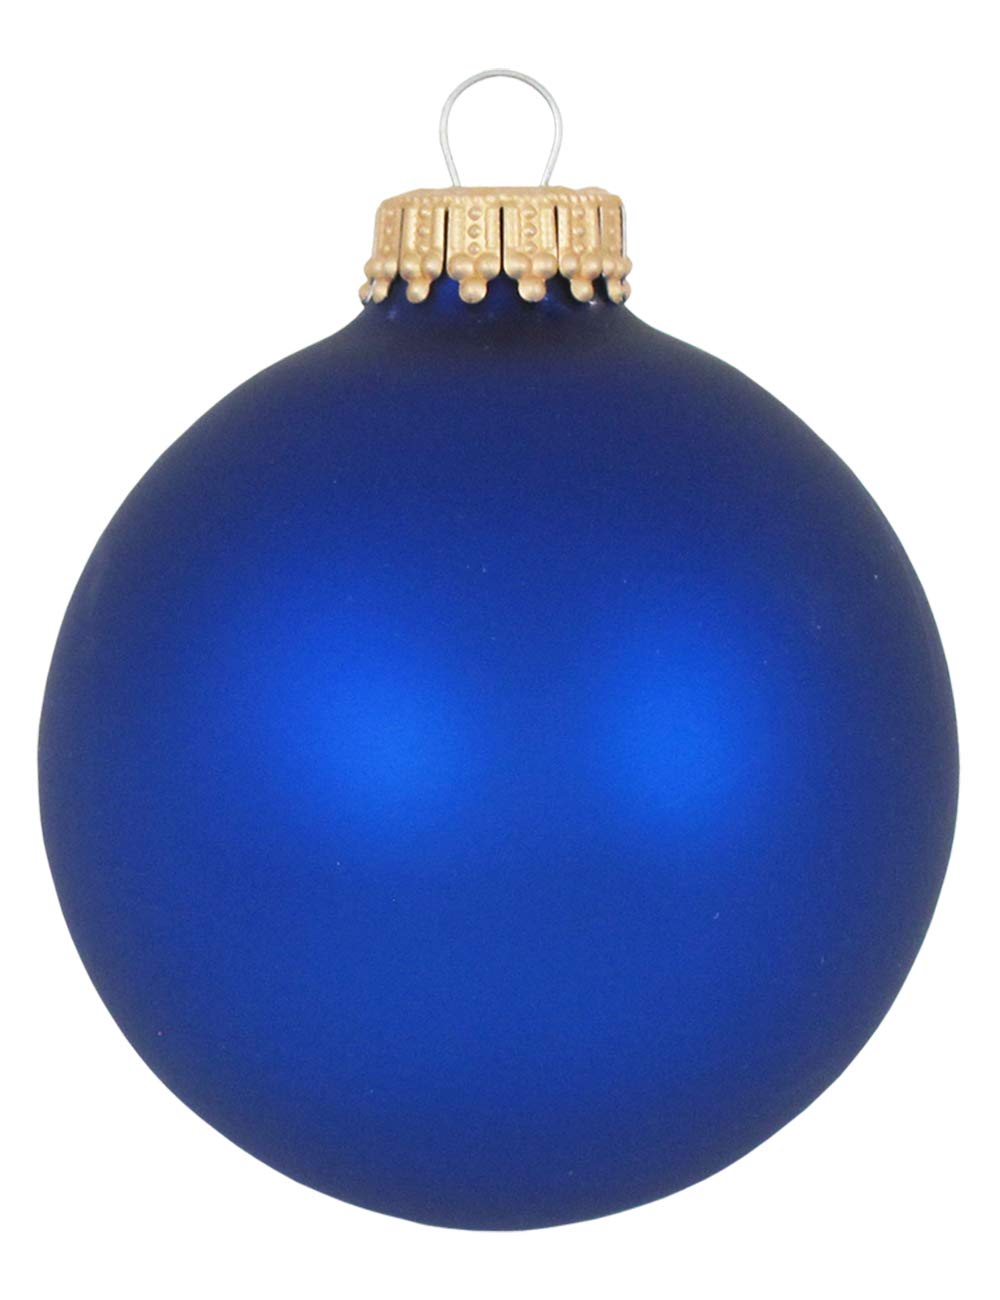 Glass Christmas Tree Ornaments - 67mm / 2.63" [8 Pieces] Designer Balls from Christmas By Krebs Seamless Hanging Holiday Decor (Velvet Royal Blue)